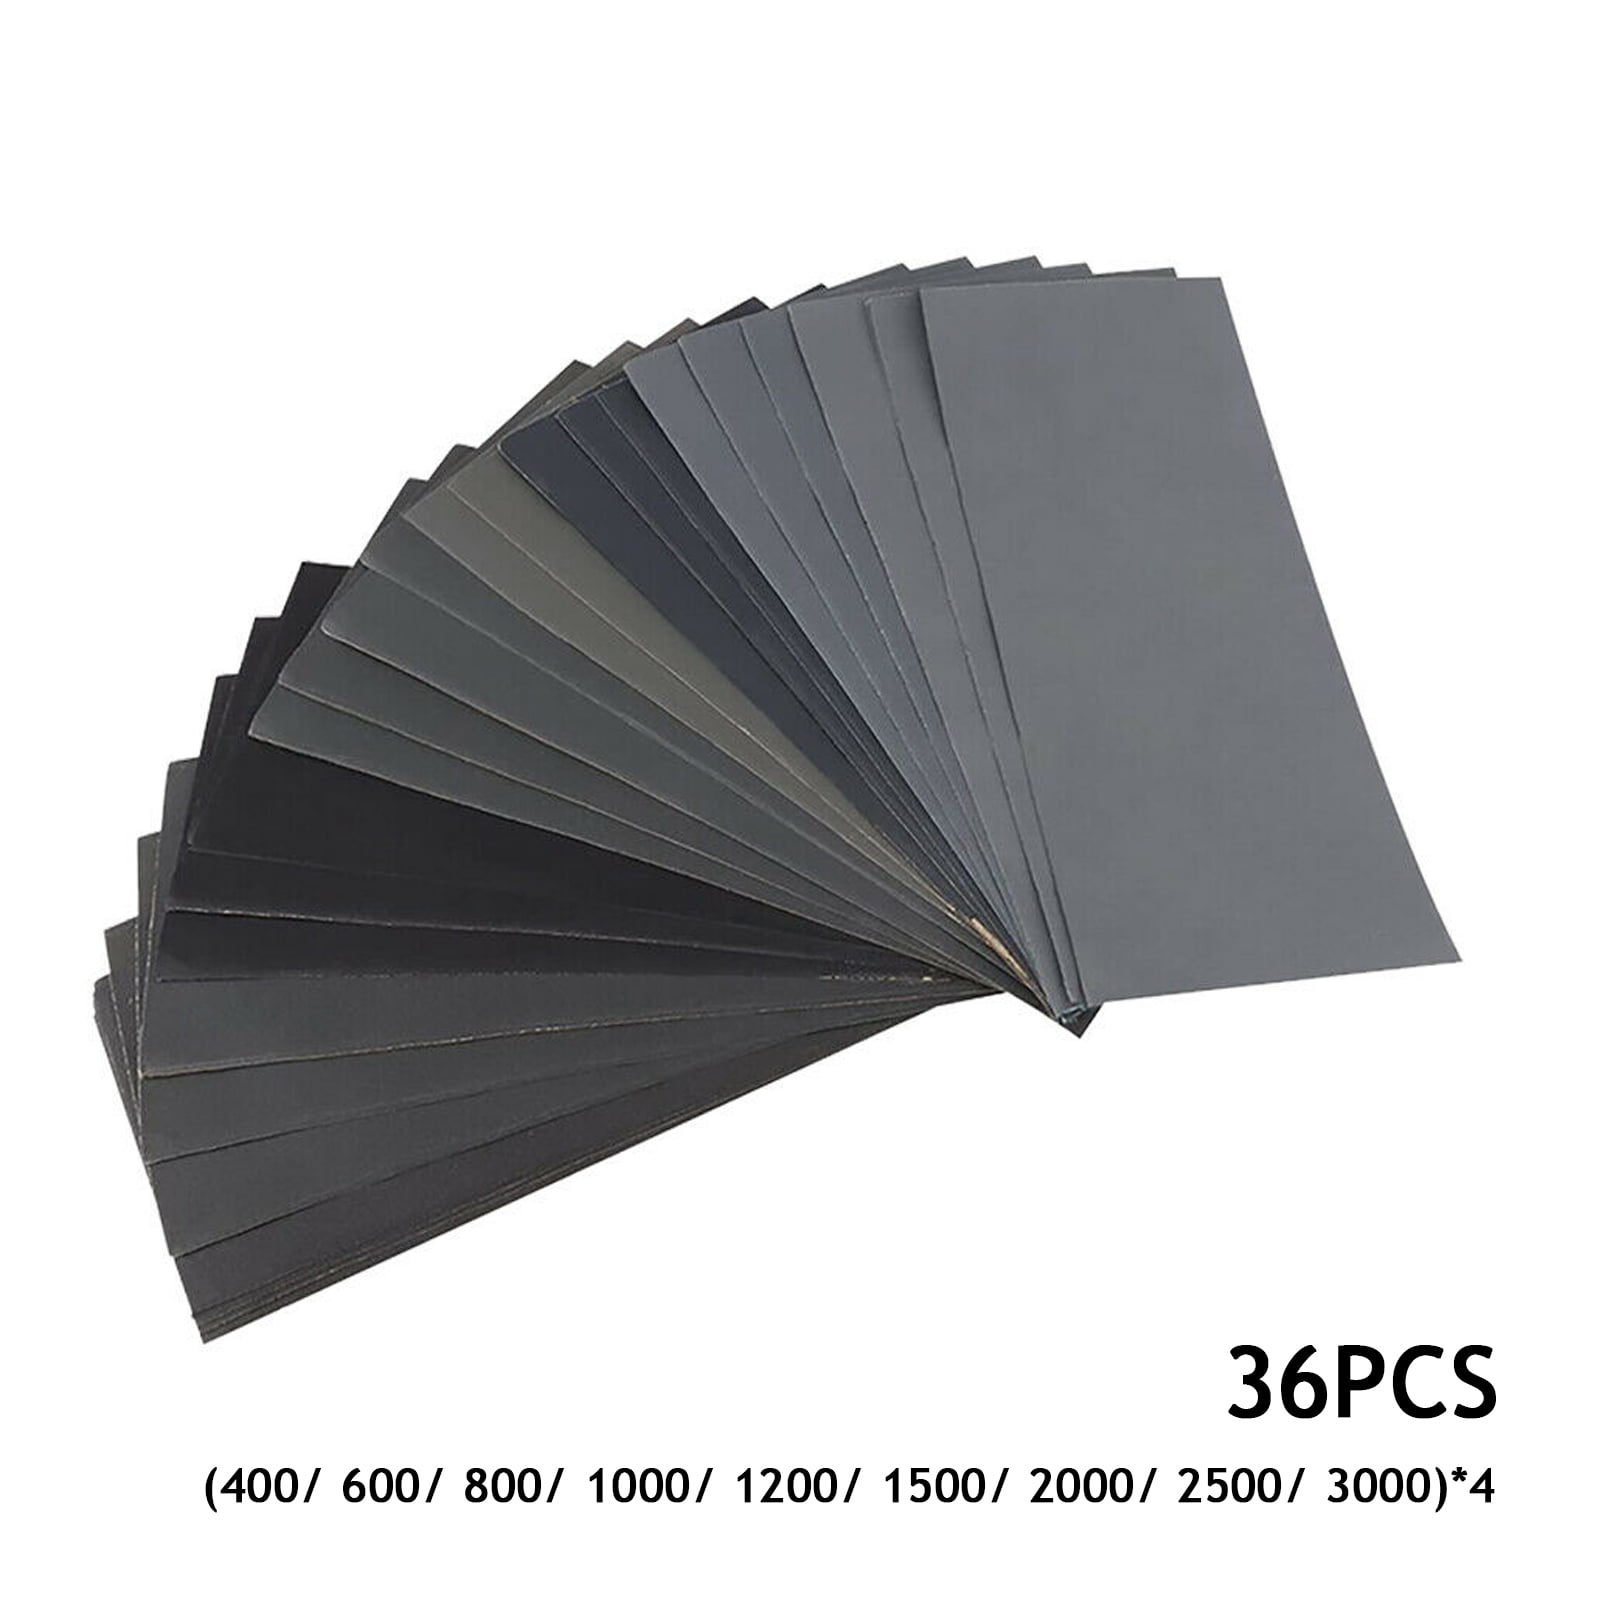 9x3.6 in 400-3000 Grit Premium Silicon Carbide Wet Dry Sandpaper Sheets Assorted 